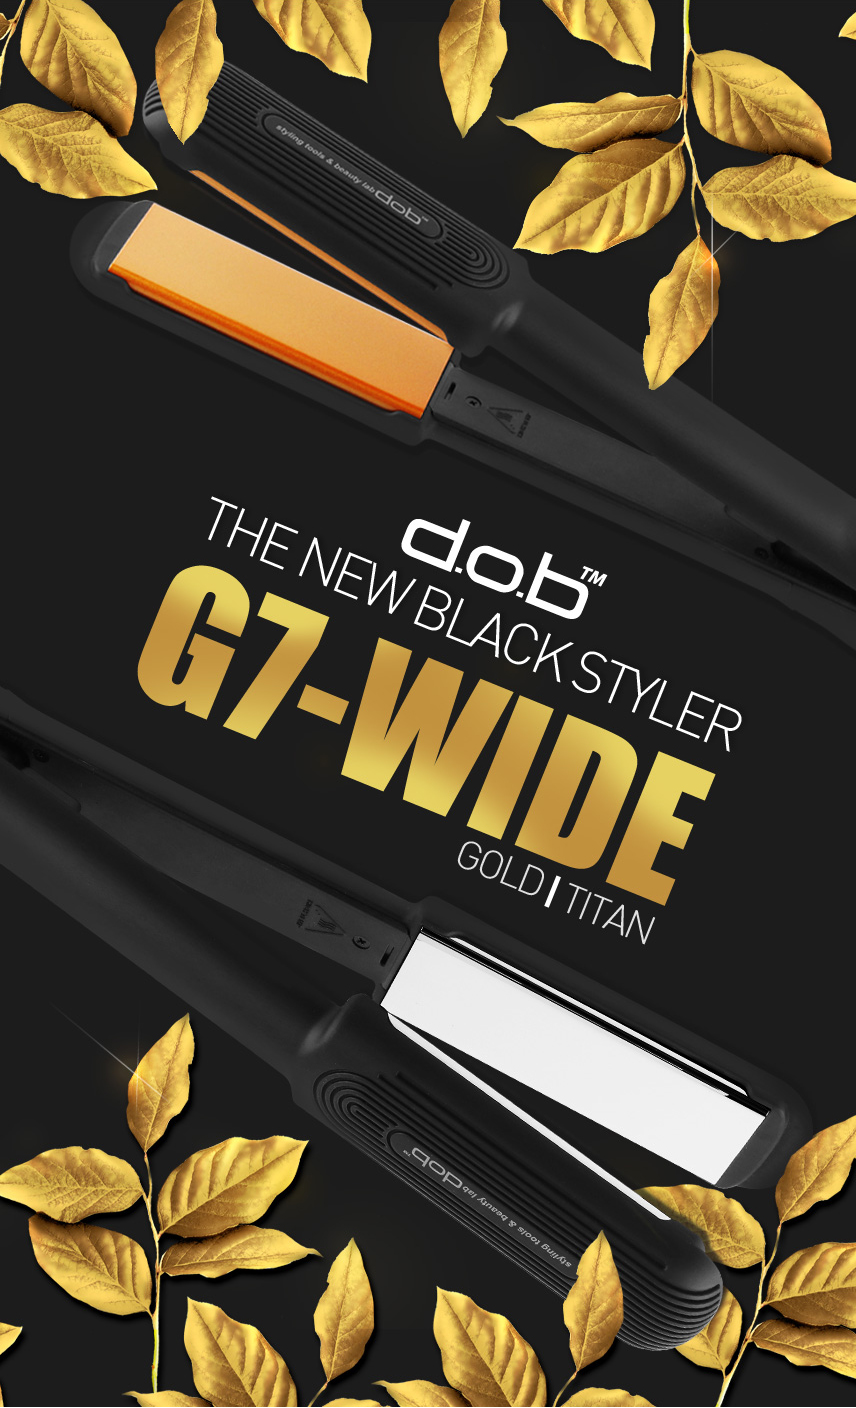 the new black styler G7-WIDE